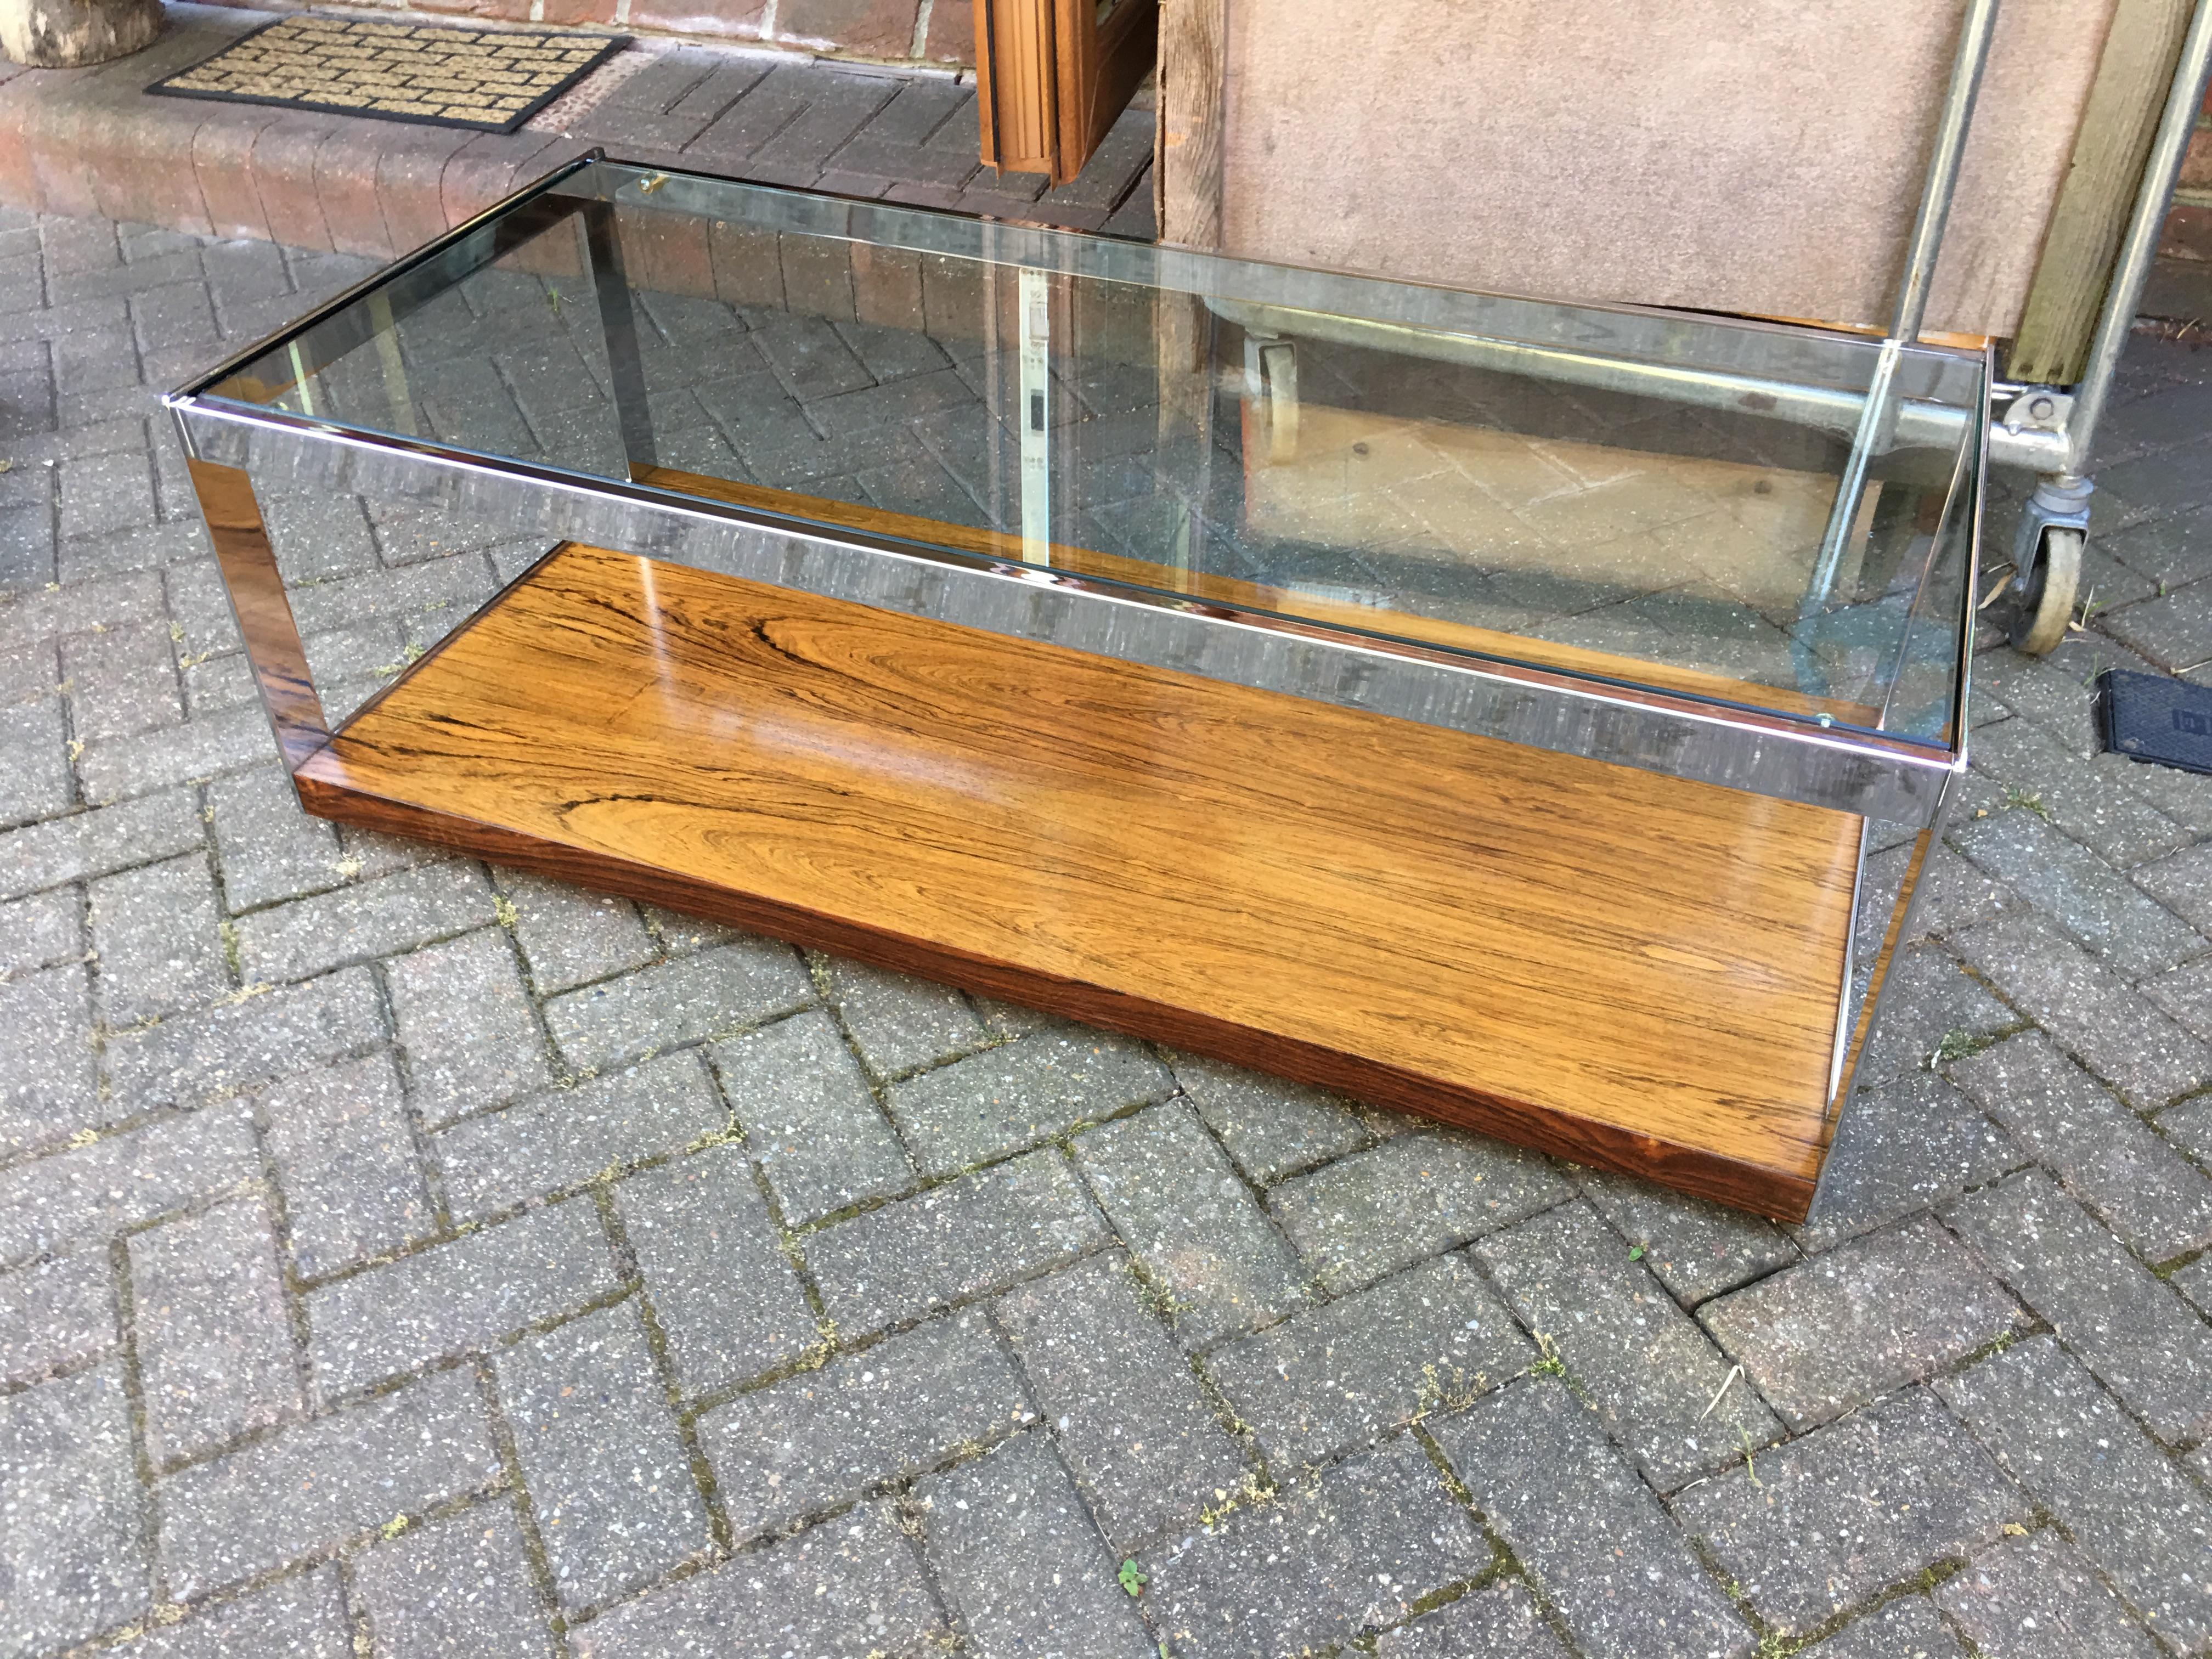 As usual, a very nice quality piece from Merrow, the rosewood on the base has nice figuring, the chrome on the steel frame is high quality, as is the glass top.
All in great condition.